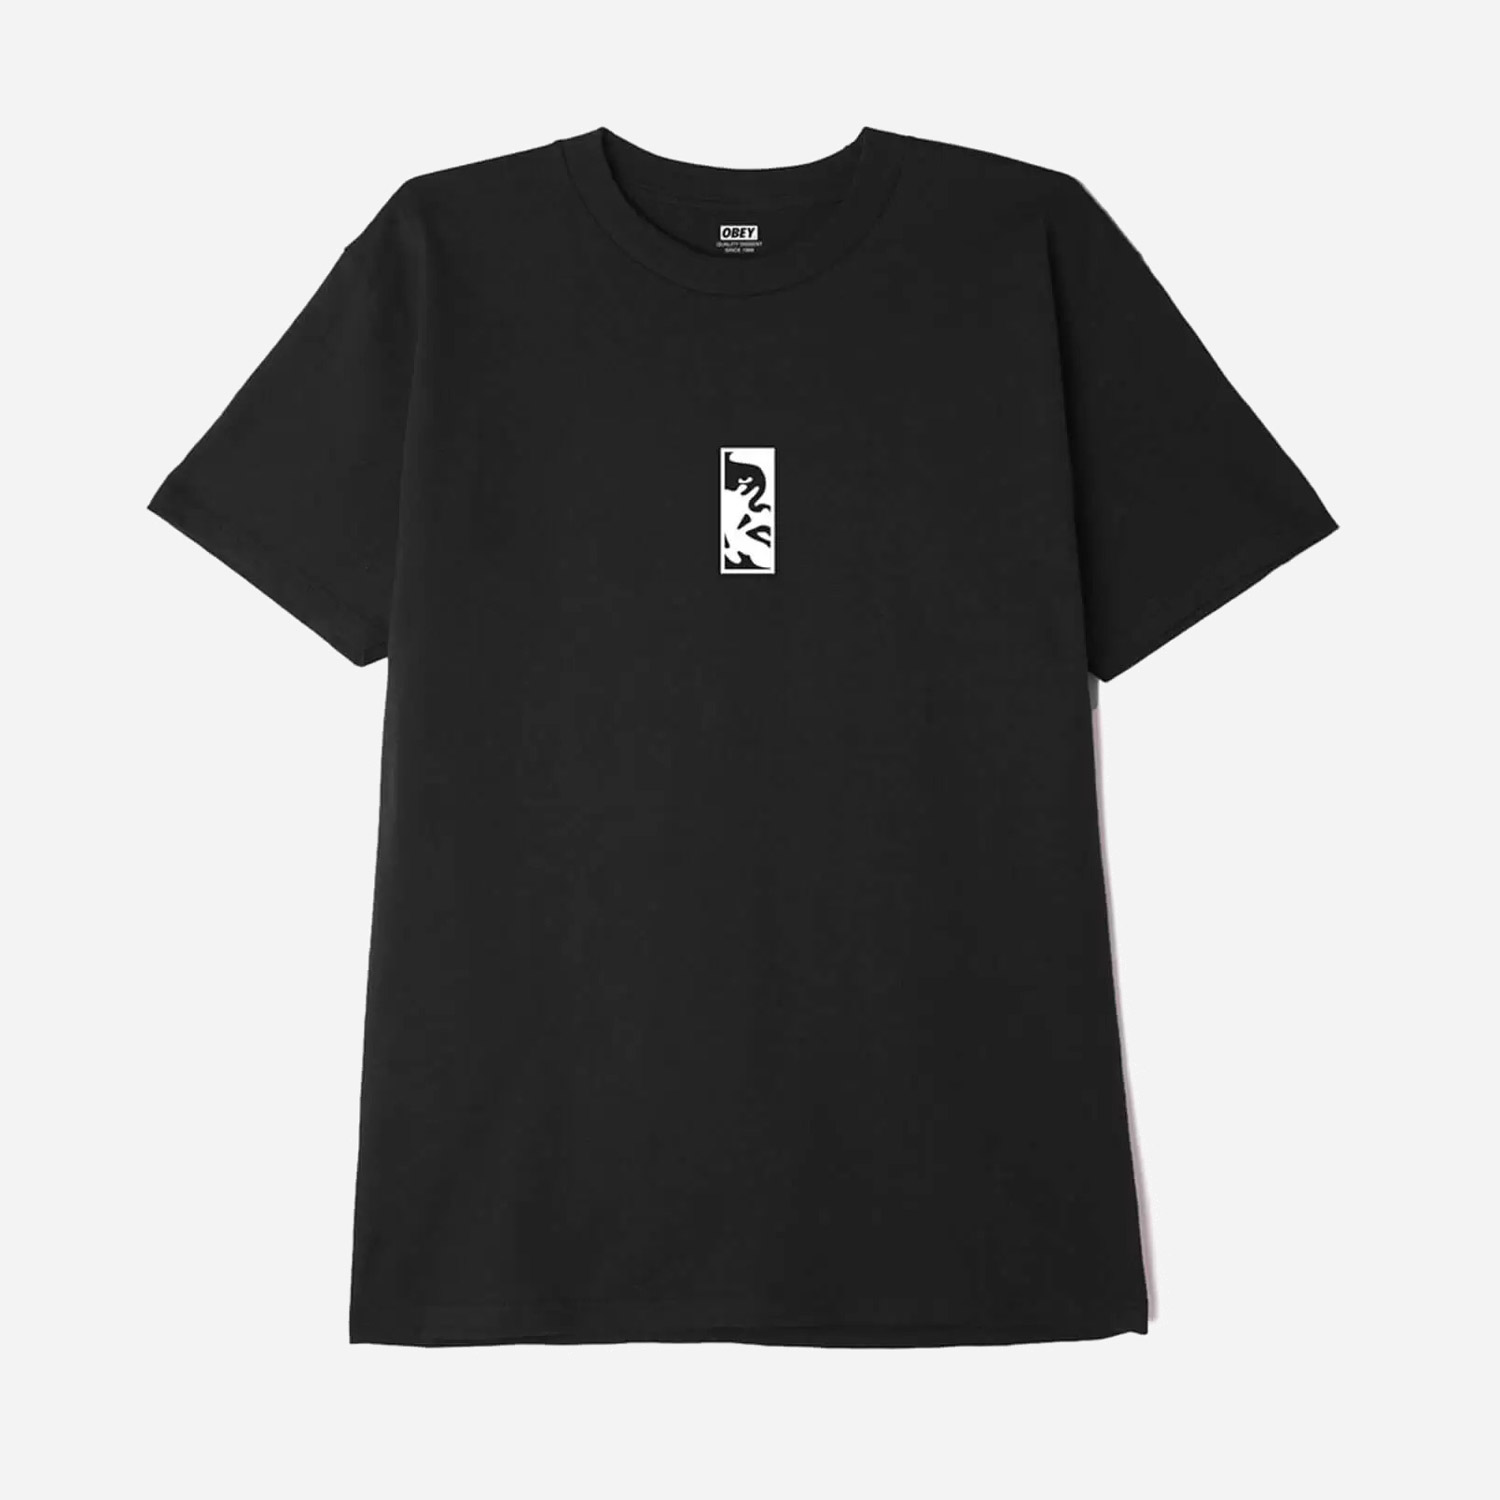 Obey Power & Equality Tee - Black